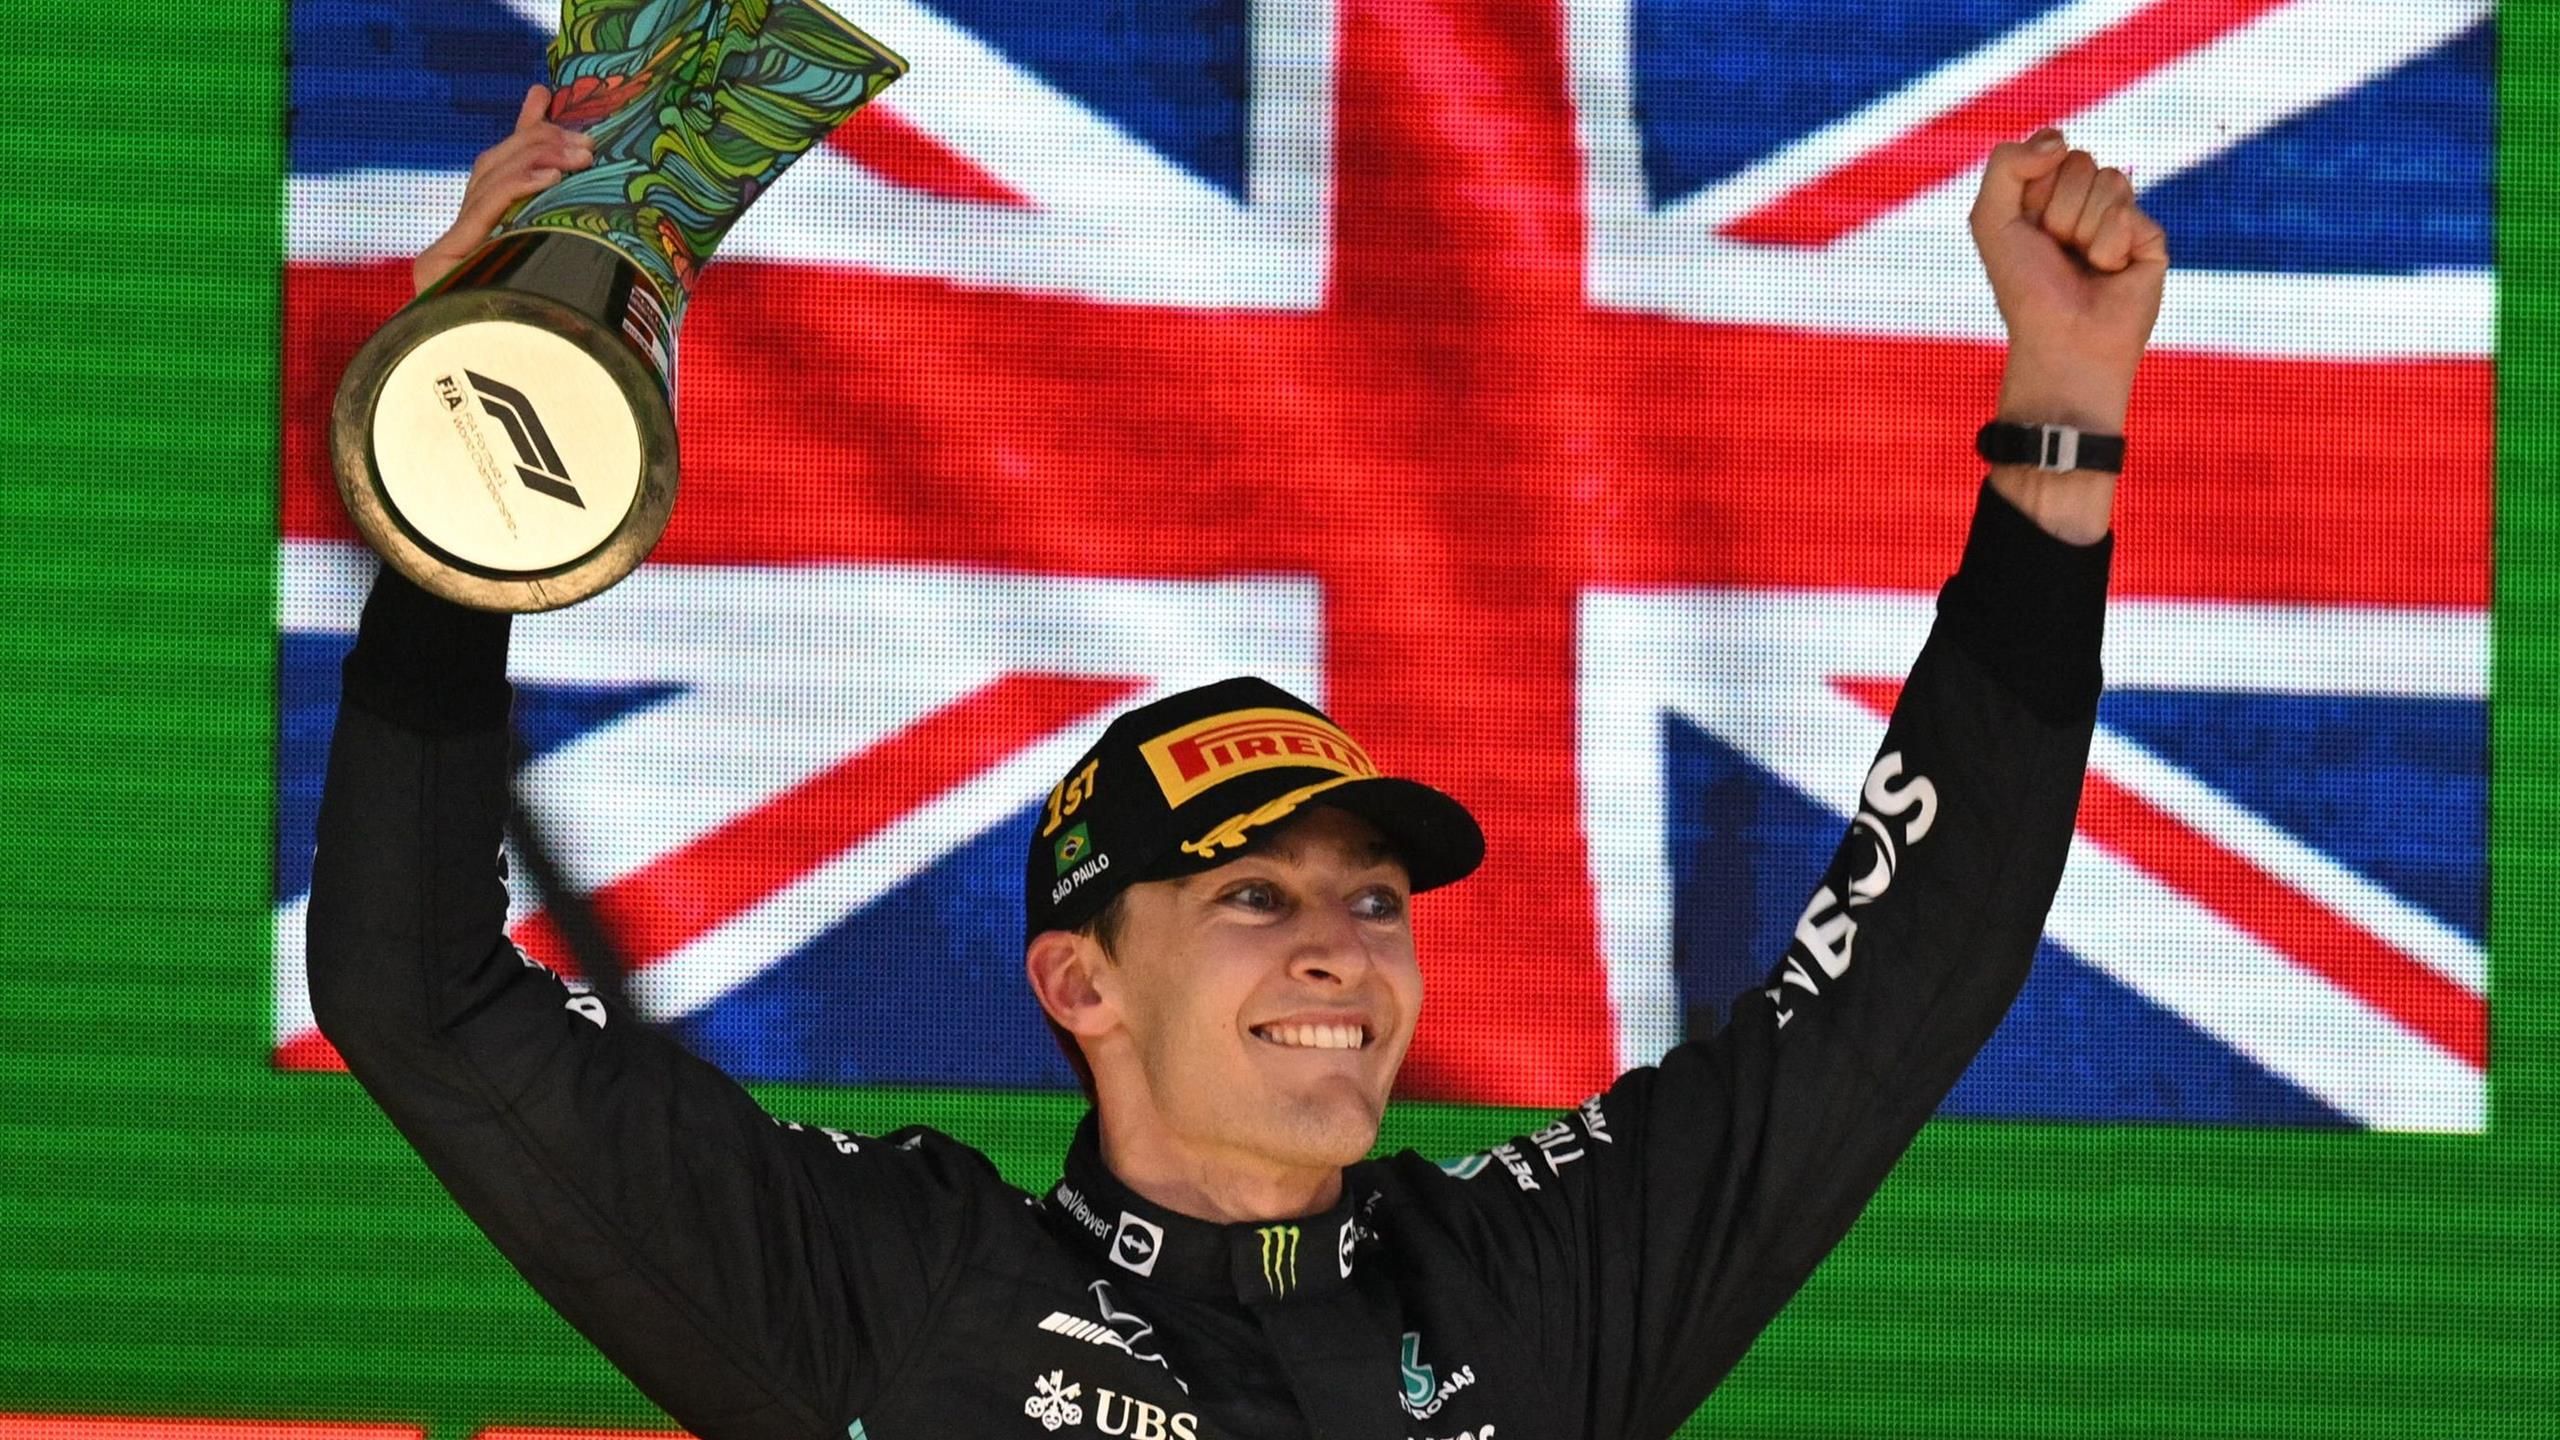 Formula 1 George Russell claims first Grand Prix win in Brazil leading Mercedes 1-2 with Lewis Hamilton